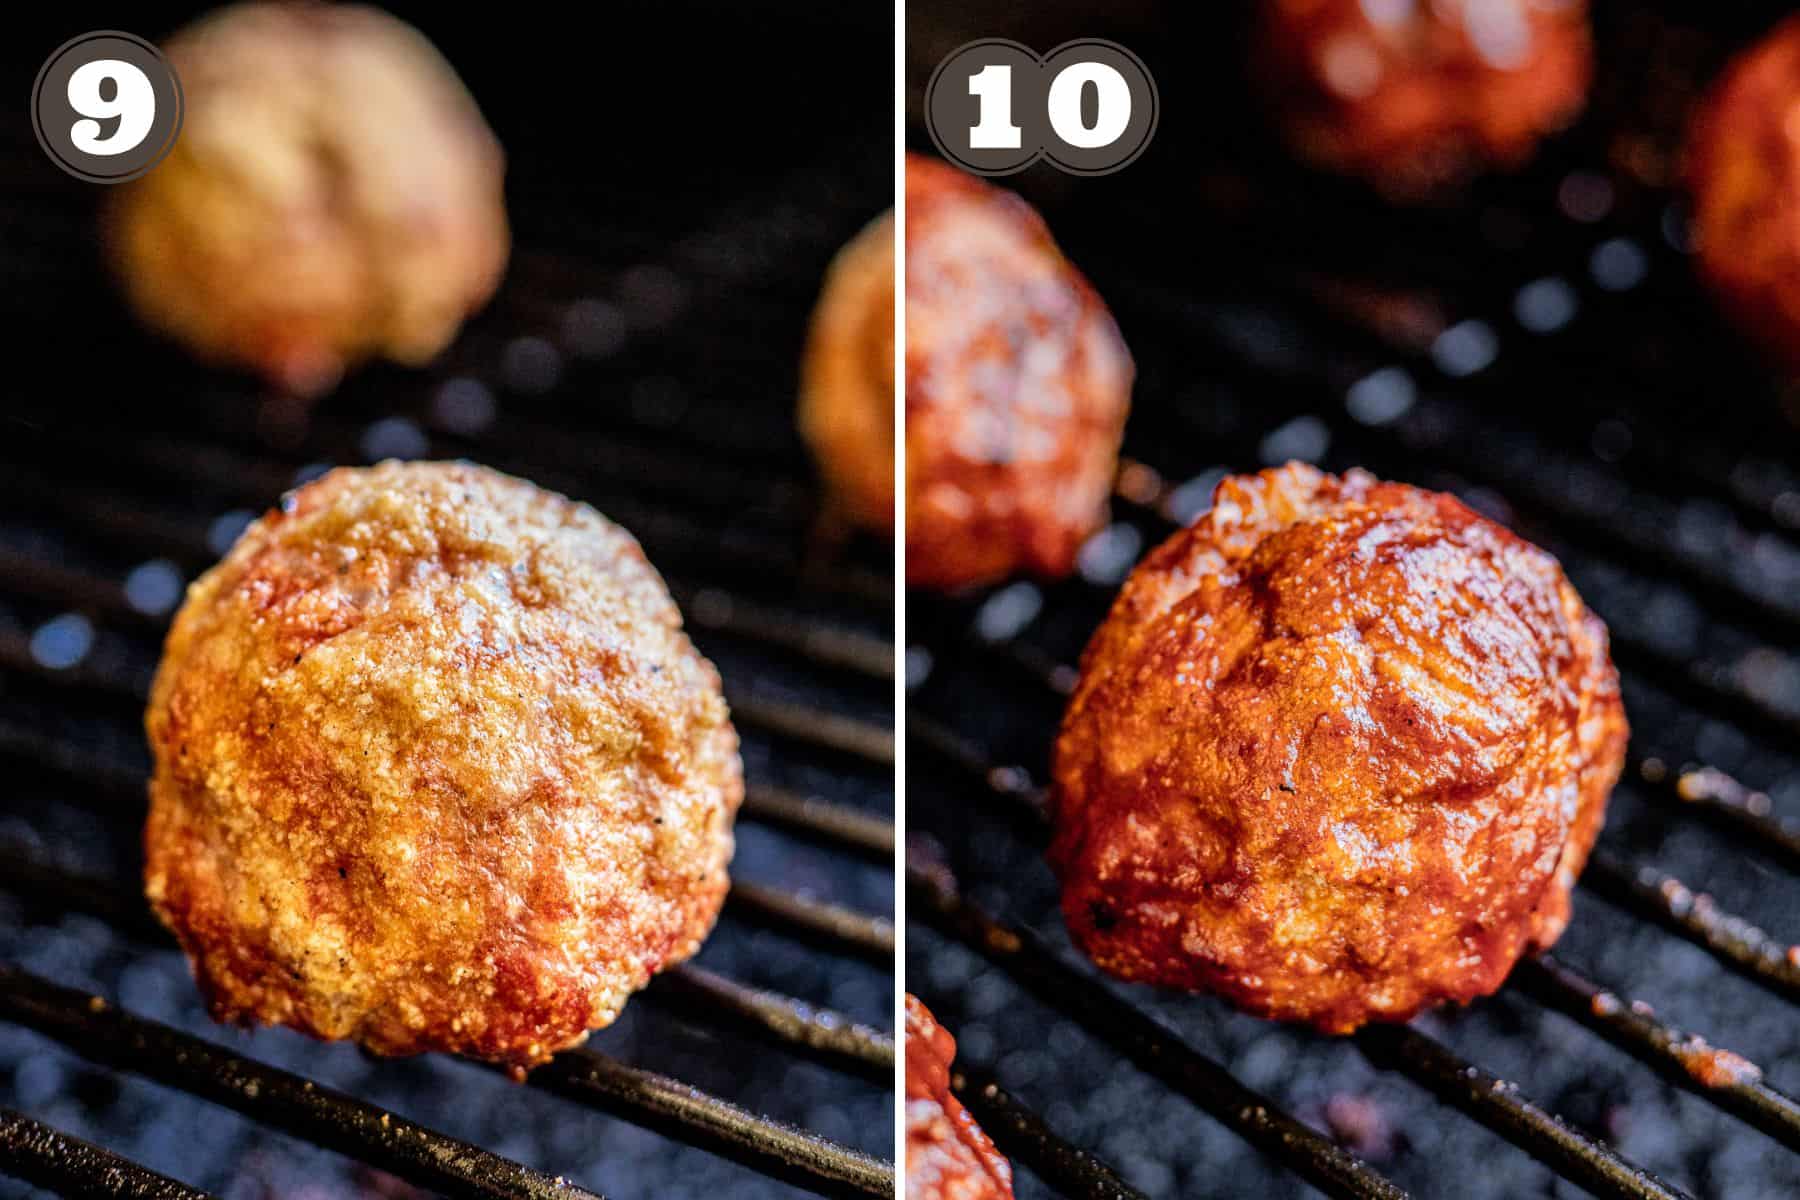 Side by side photos showing scotch eggs being placed on a pellet smoker and brushed with BBQ sauce.